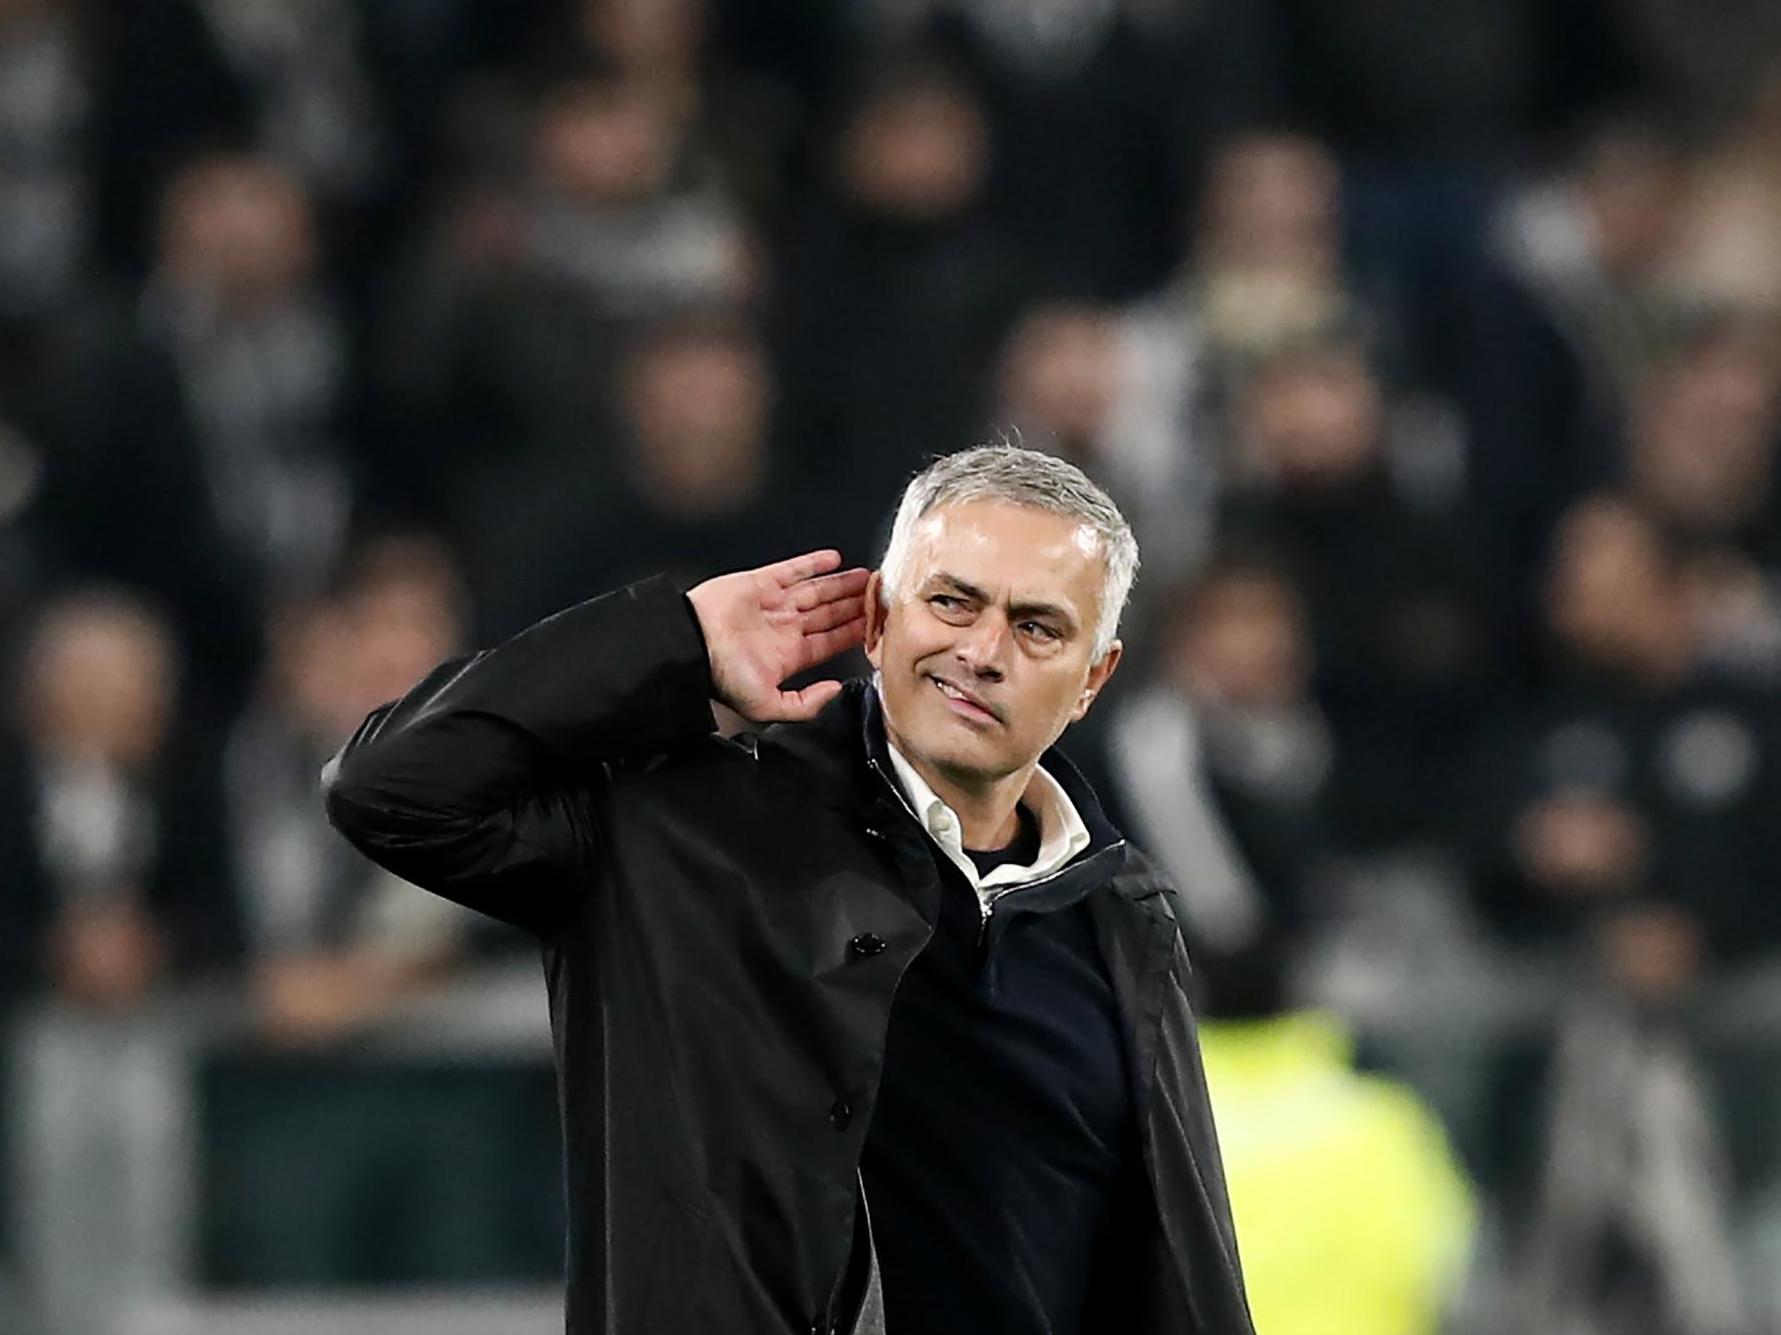 Mourinho gestures to the Juventus fans after Manchester United's 2-1 victory